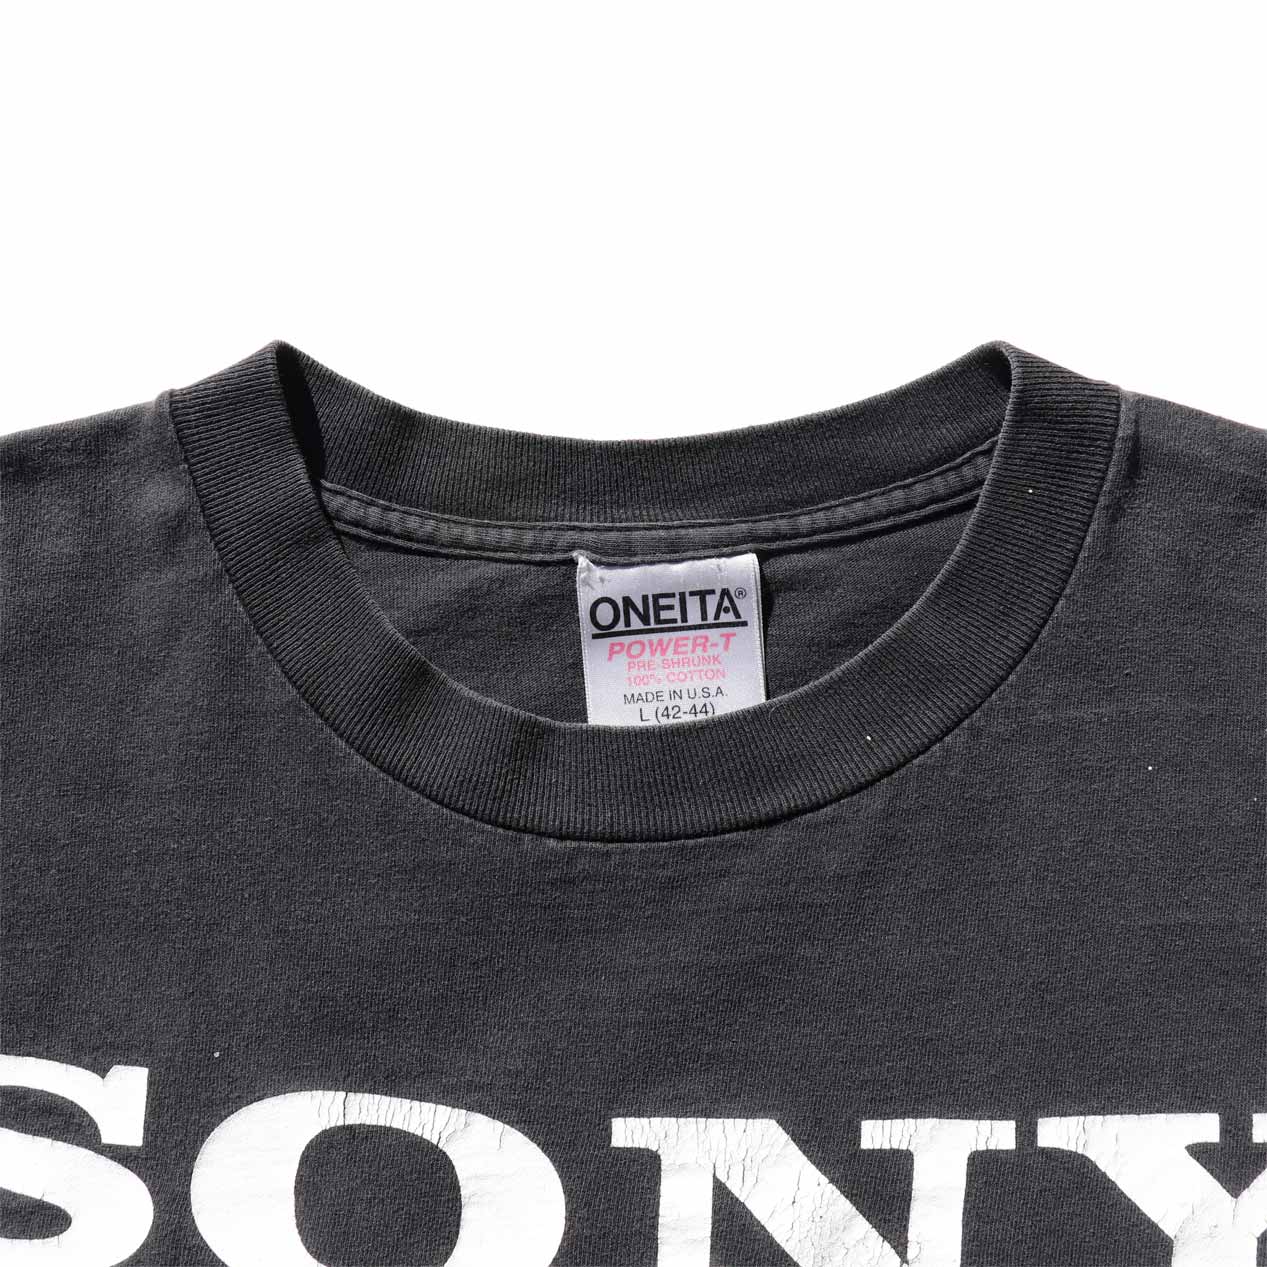 POST JUNK / 90's SONY “MD” USA製 Tシャツ [L]